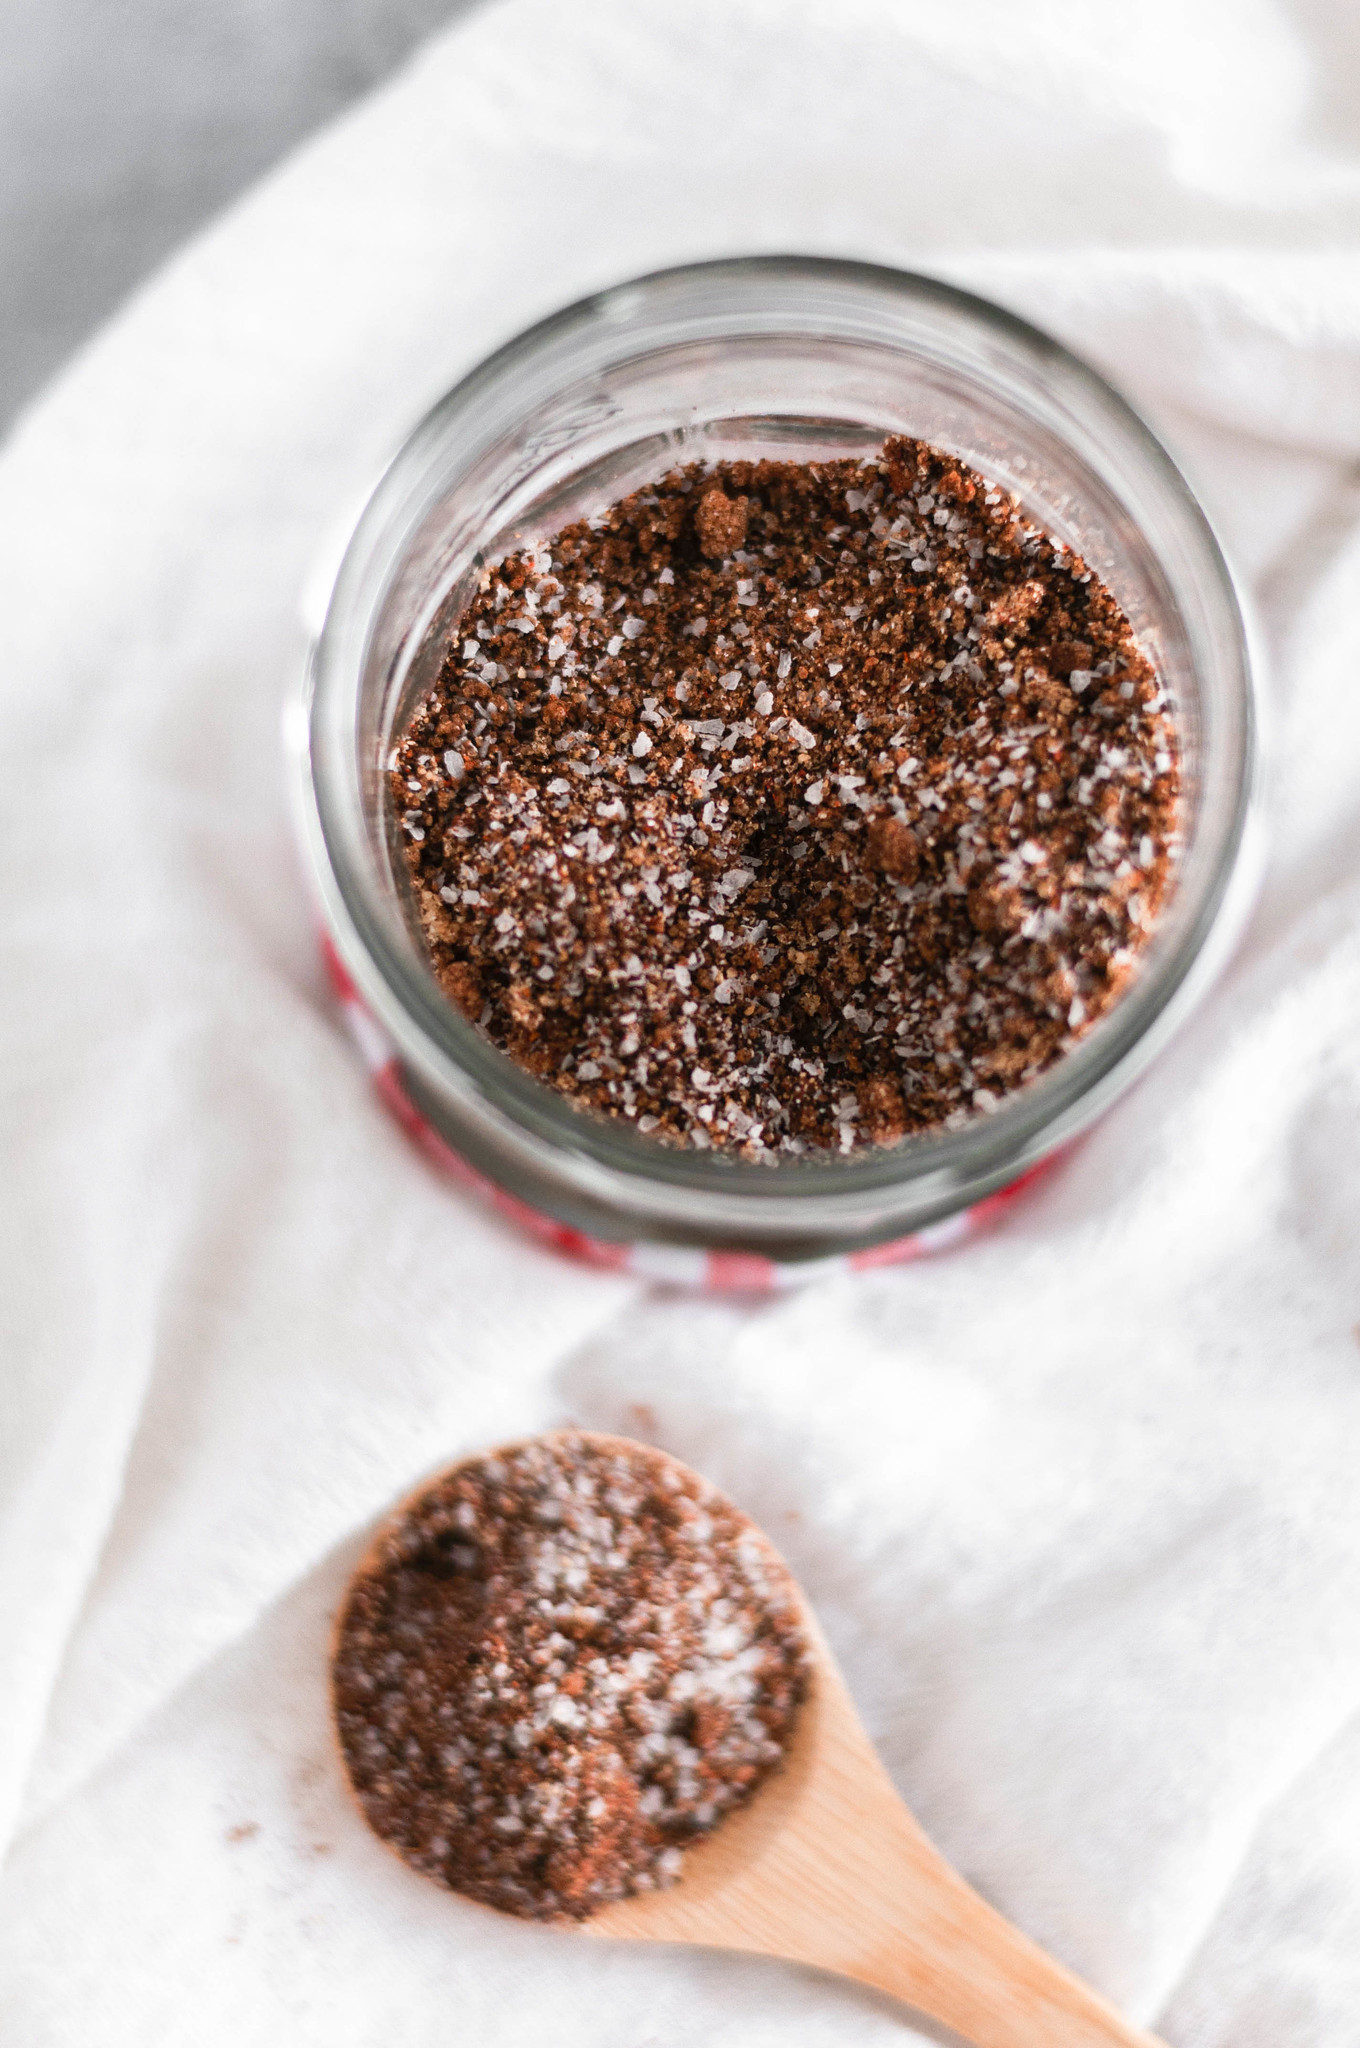 Ditch the store-bought spice blends and make your own at home. This homemade Coffee Rub adds incredible richness and flavor to beef, pork and veggies.